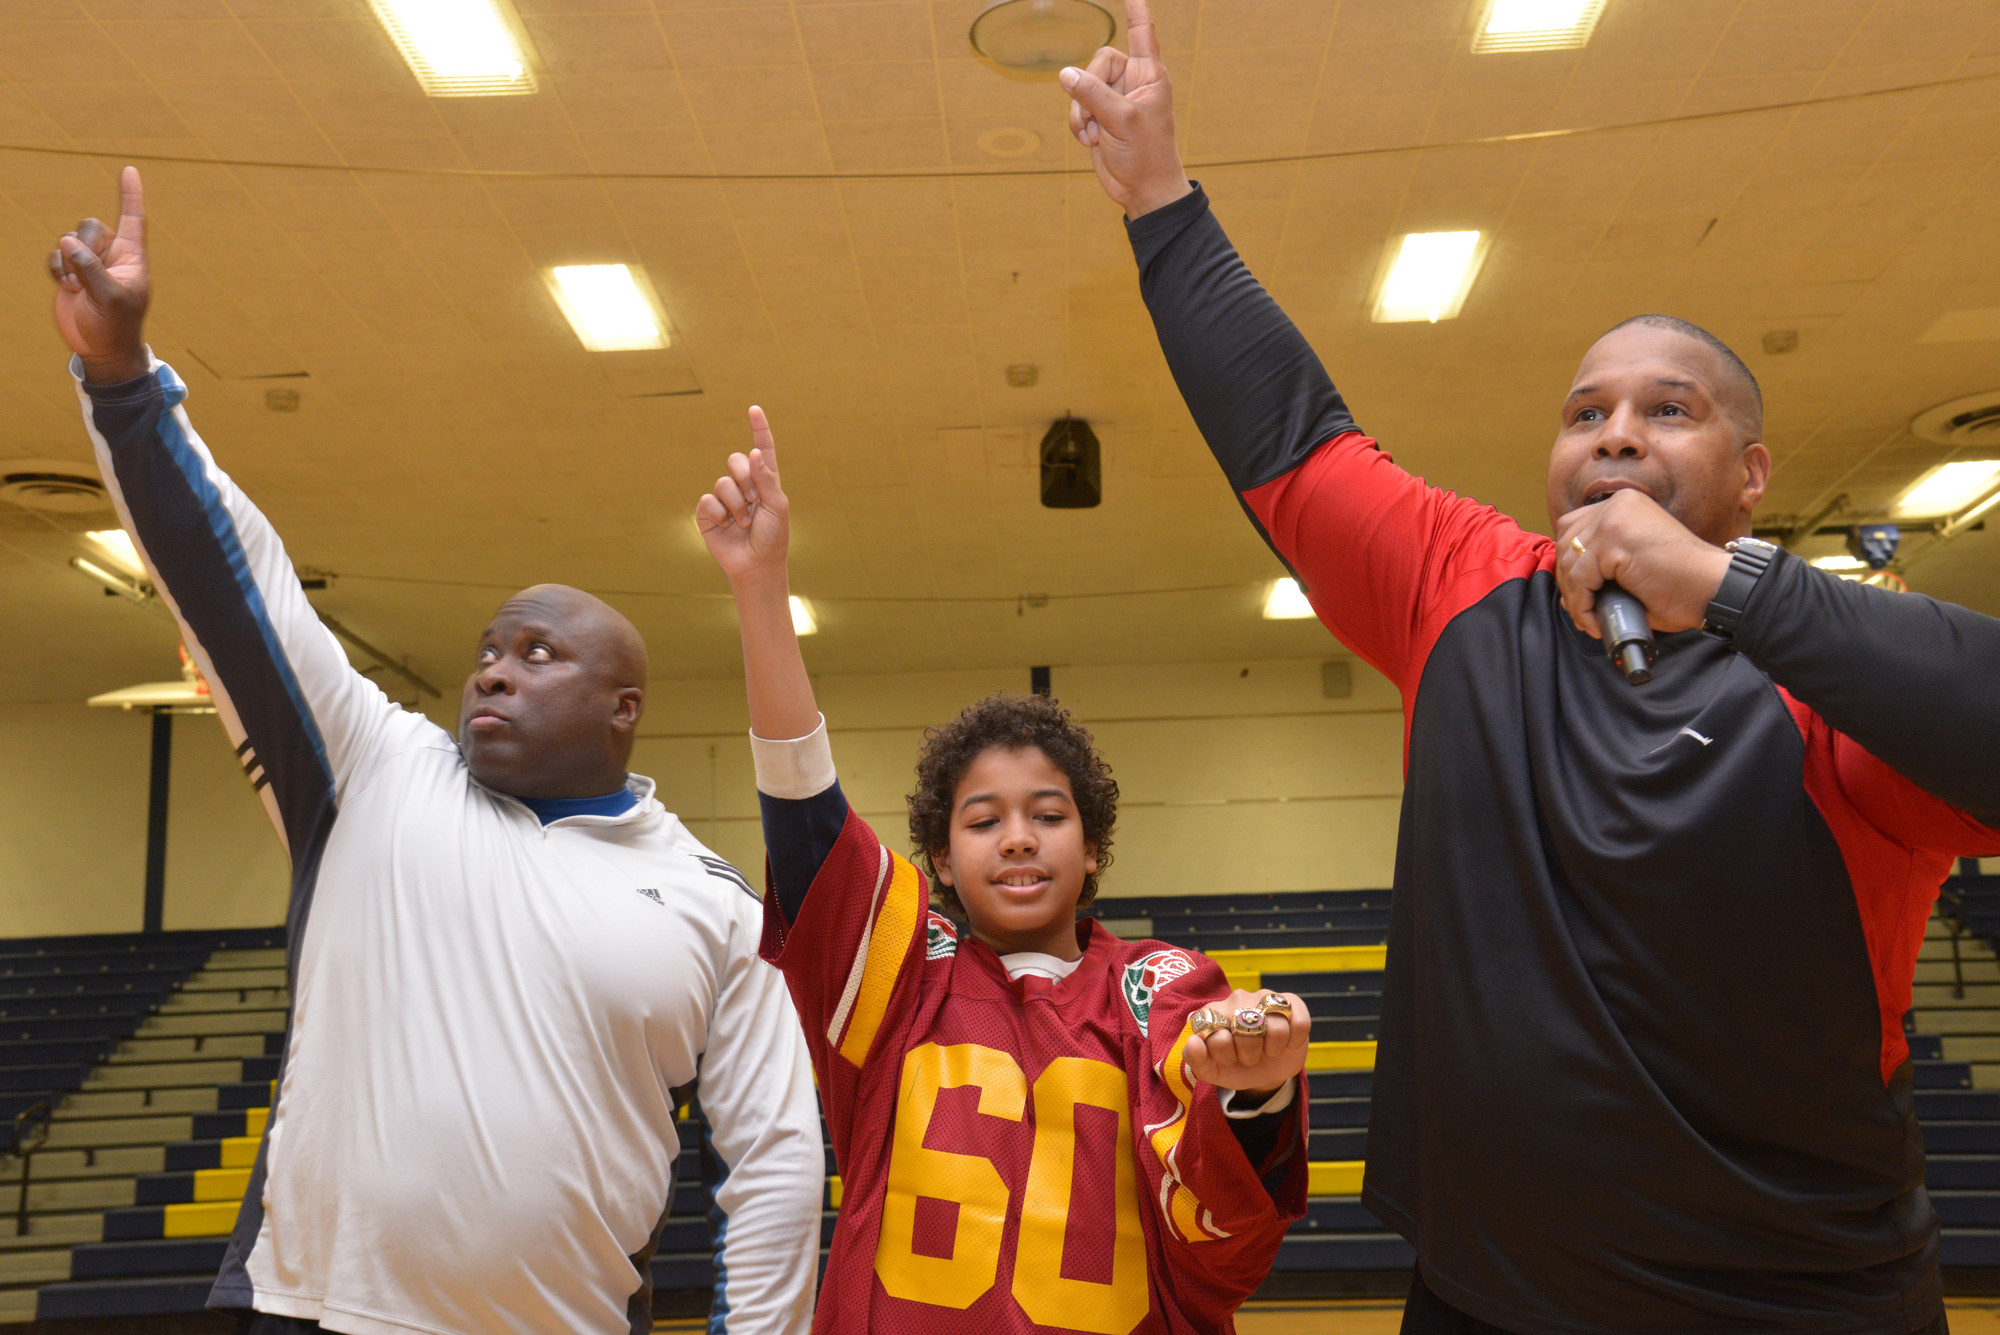 Clarence Lee, left, Ayden Steward and Keith Davis, a former New York Giant, at BHS during the Winners Inc. presentation. Ayden was wearing a number of the football players’ championship rings at the closing of the 
assembly. The event was sponsored by Brian Curran and Dean Skelos.